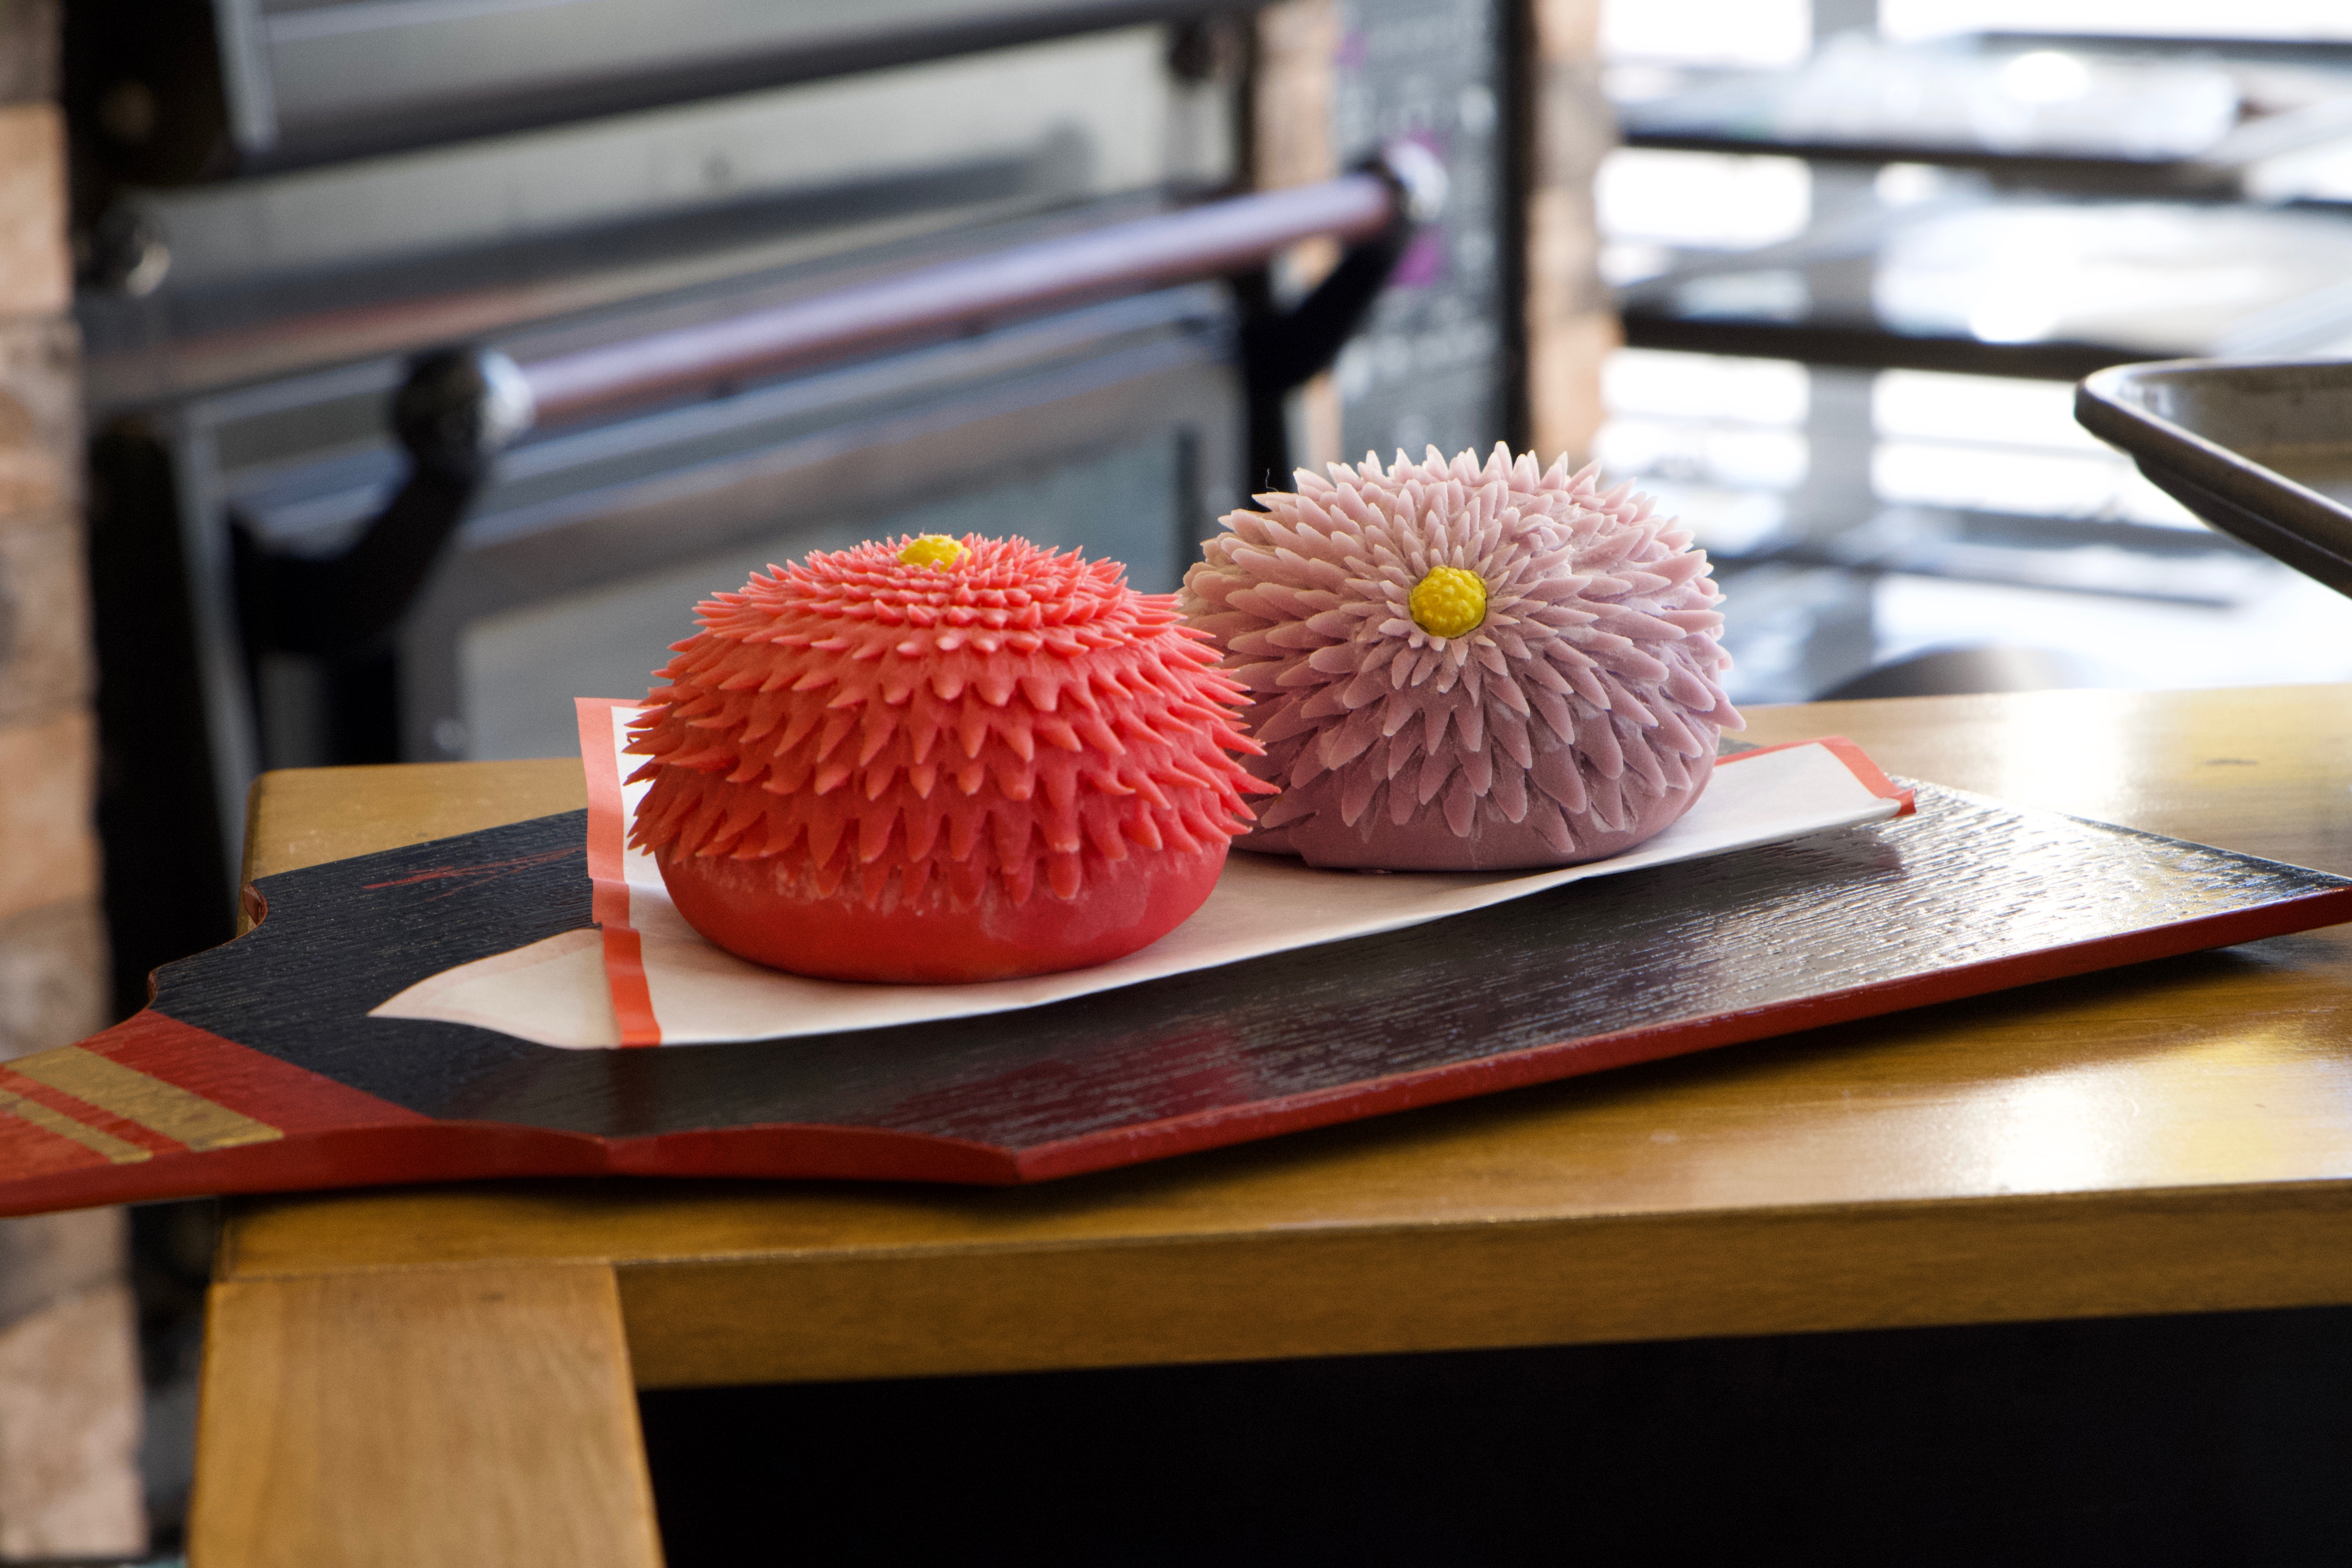 Wagashi and British Sweets: A Match Made in Anglo-Japanese Heaven